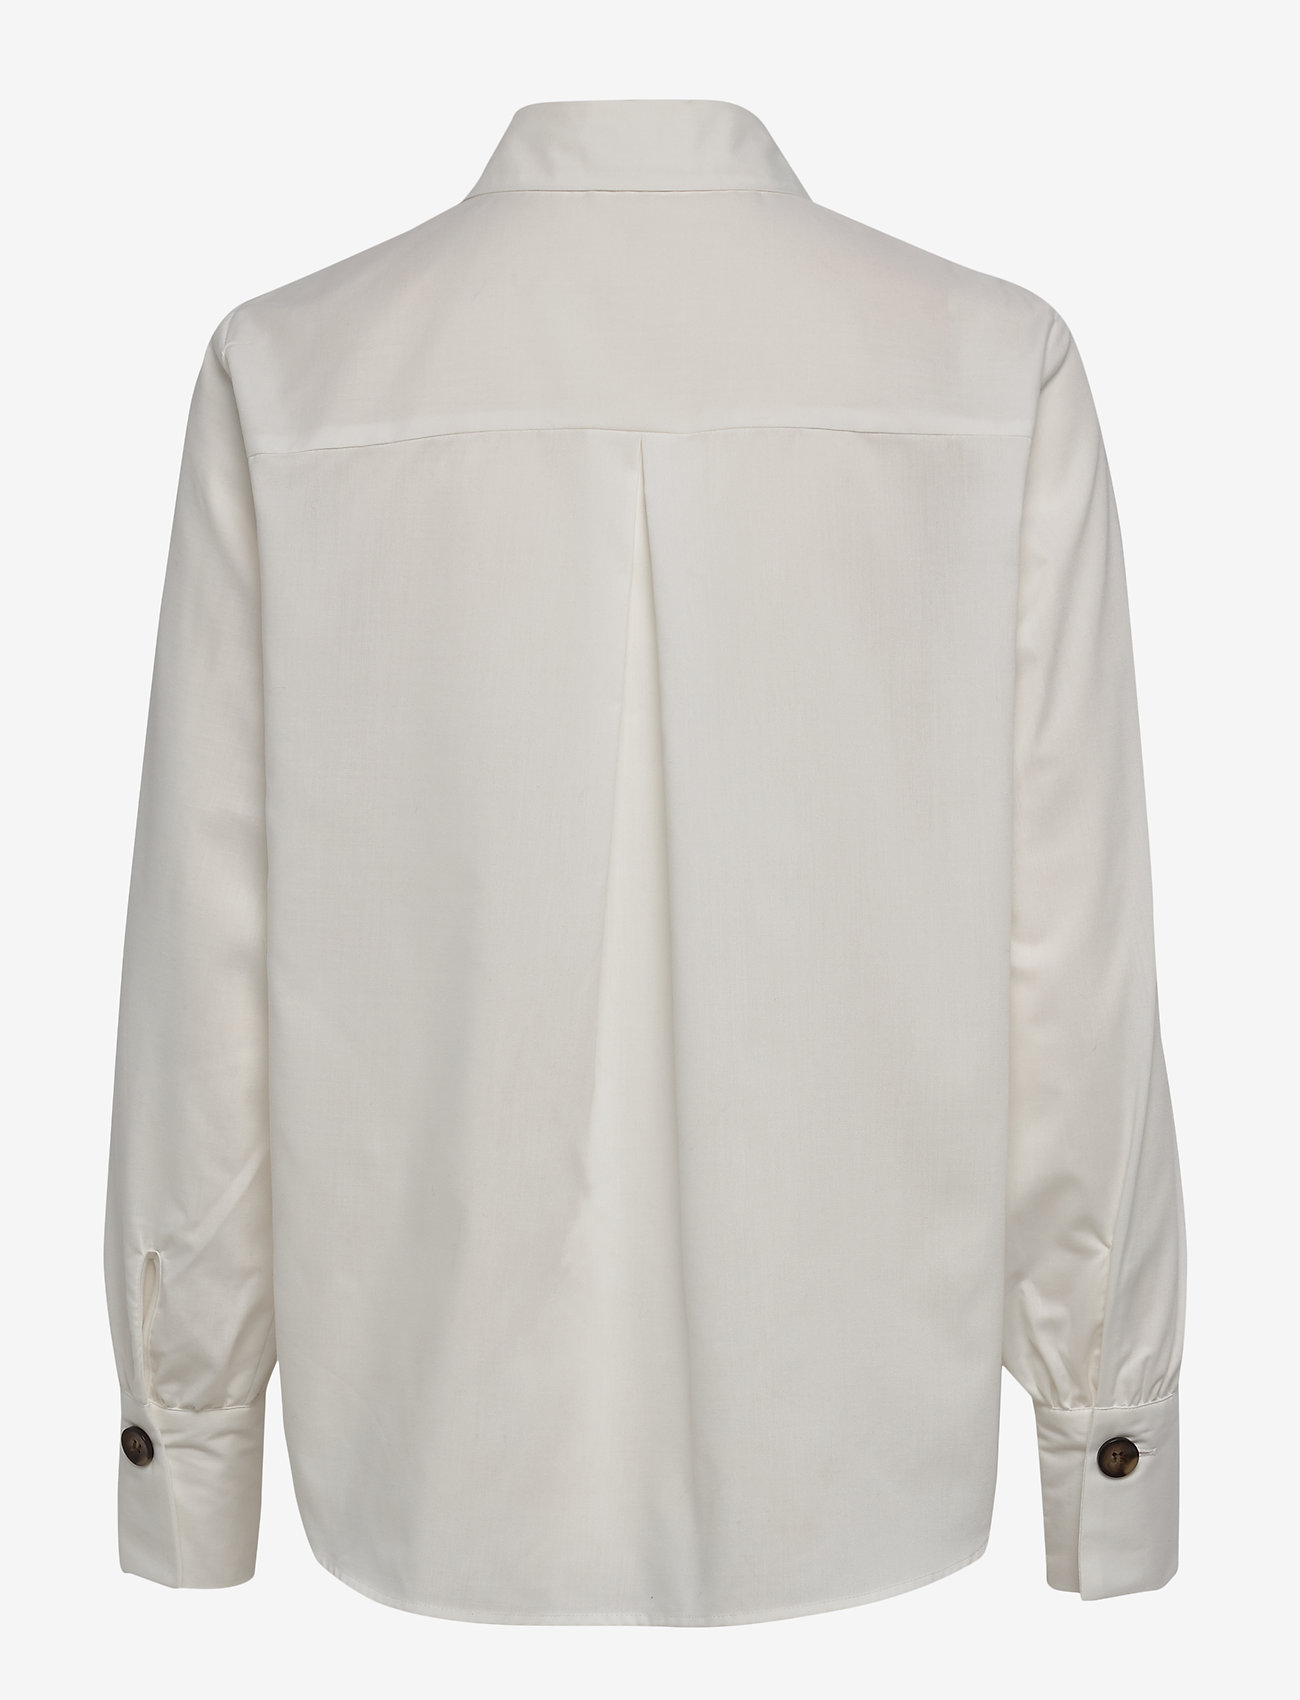 FREE/QUENT - FQFLYNN-SH - long-sleeved shirts - offwhite 11-4800 - 1